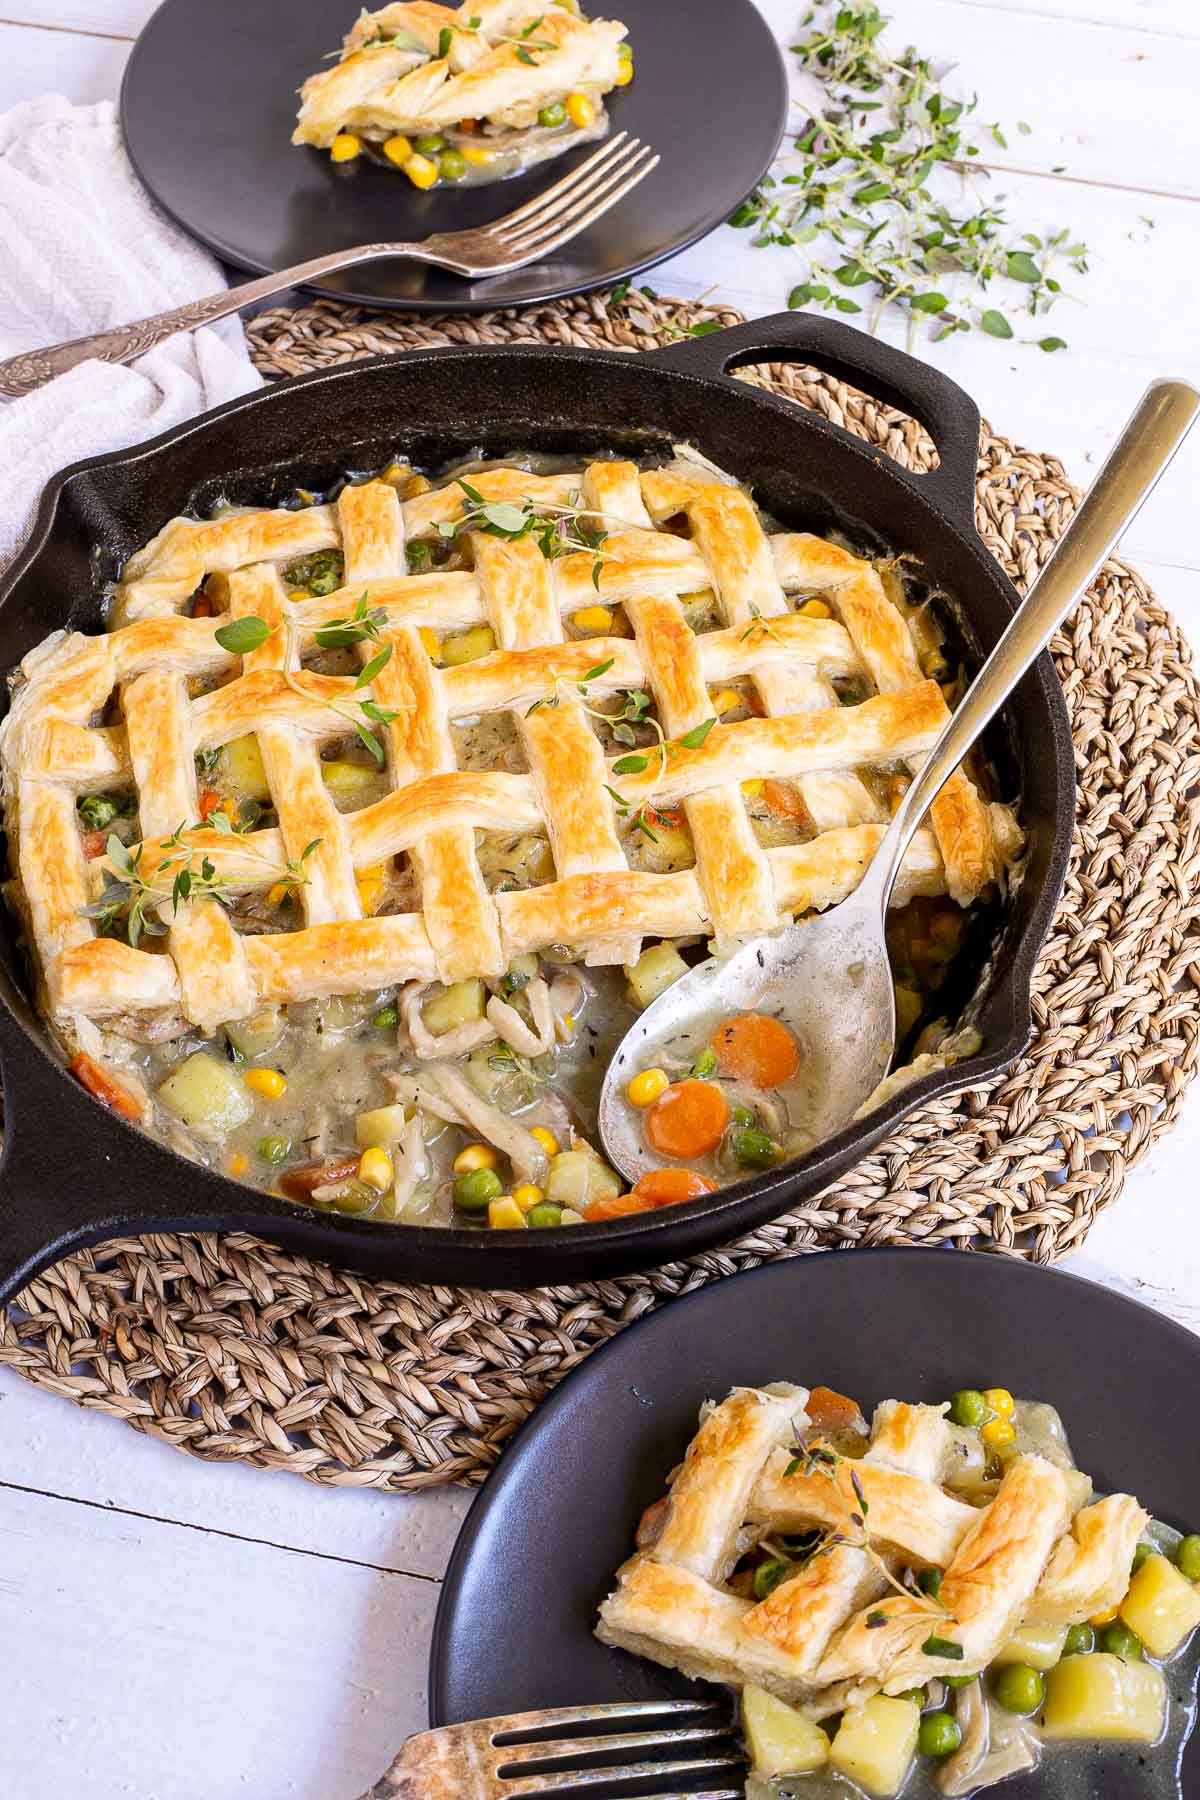 Cast iron skillet with veggie stew topped with puff pastry in a lattice pattern. A part of it is missing and the stew is visible next to the serving spoon.